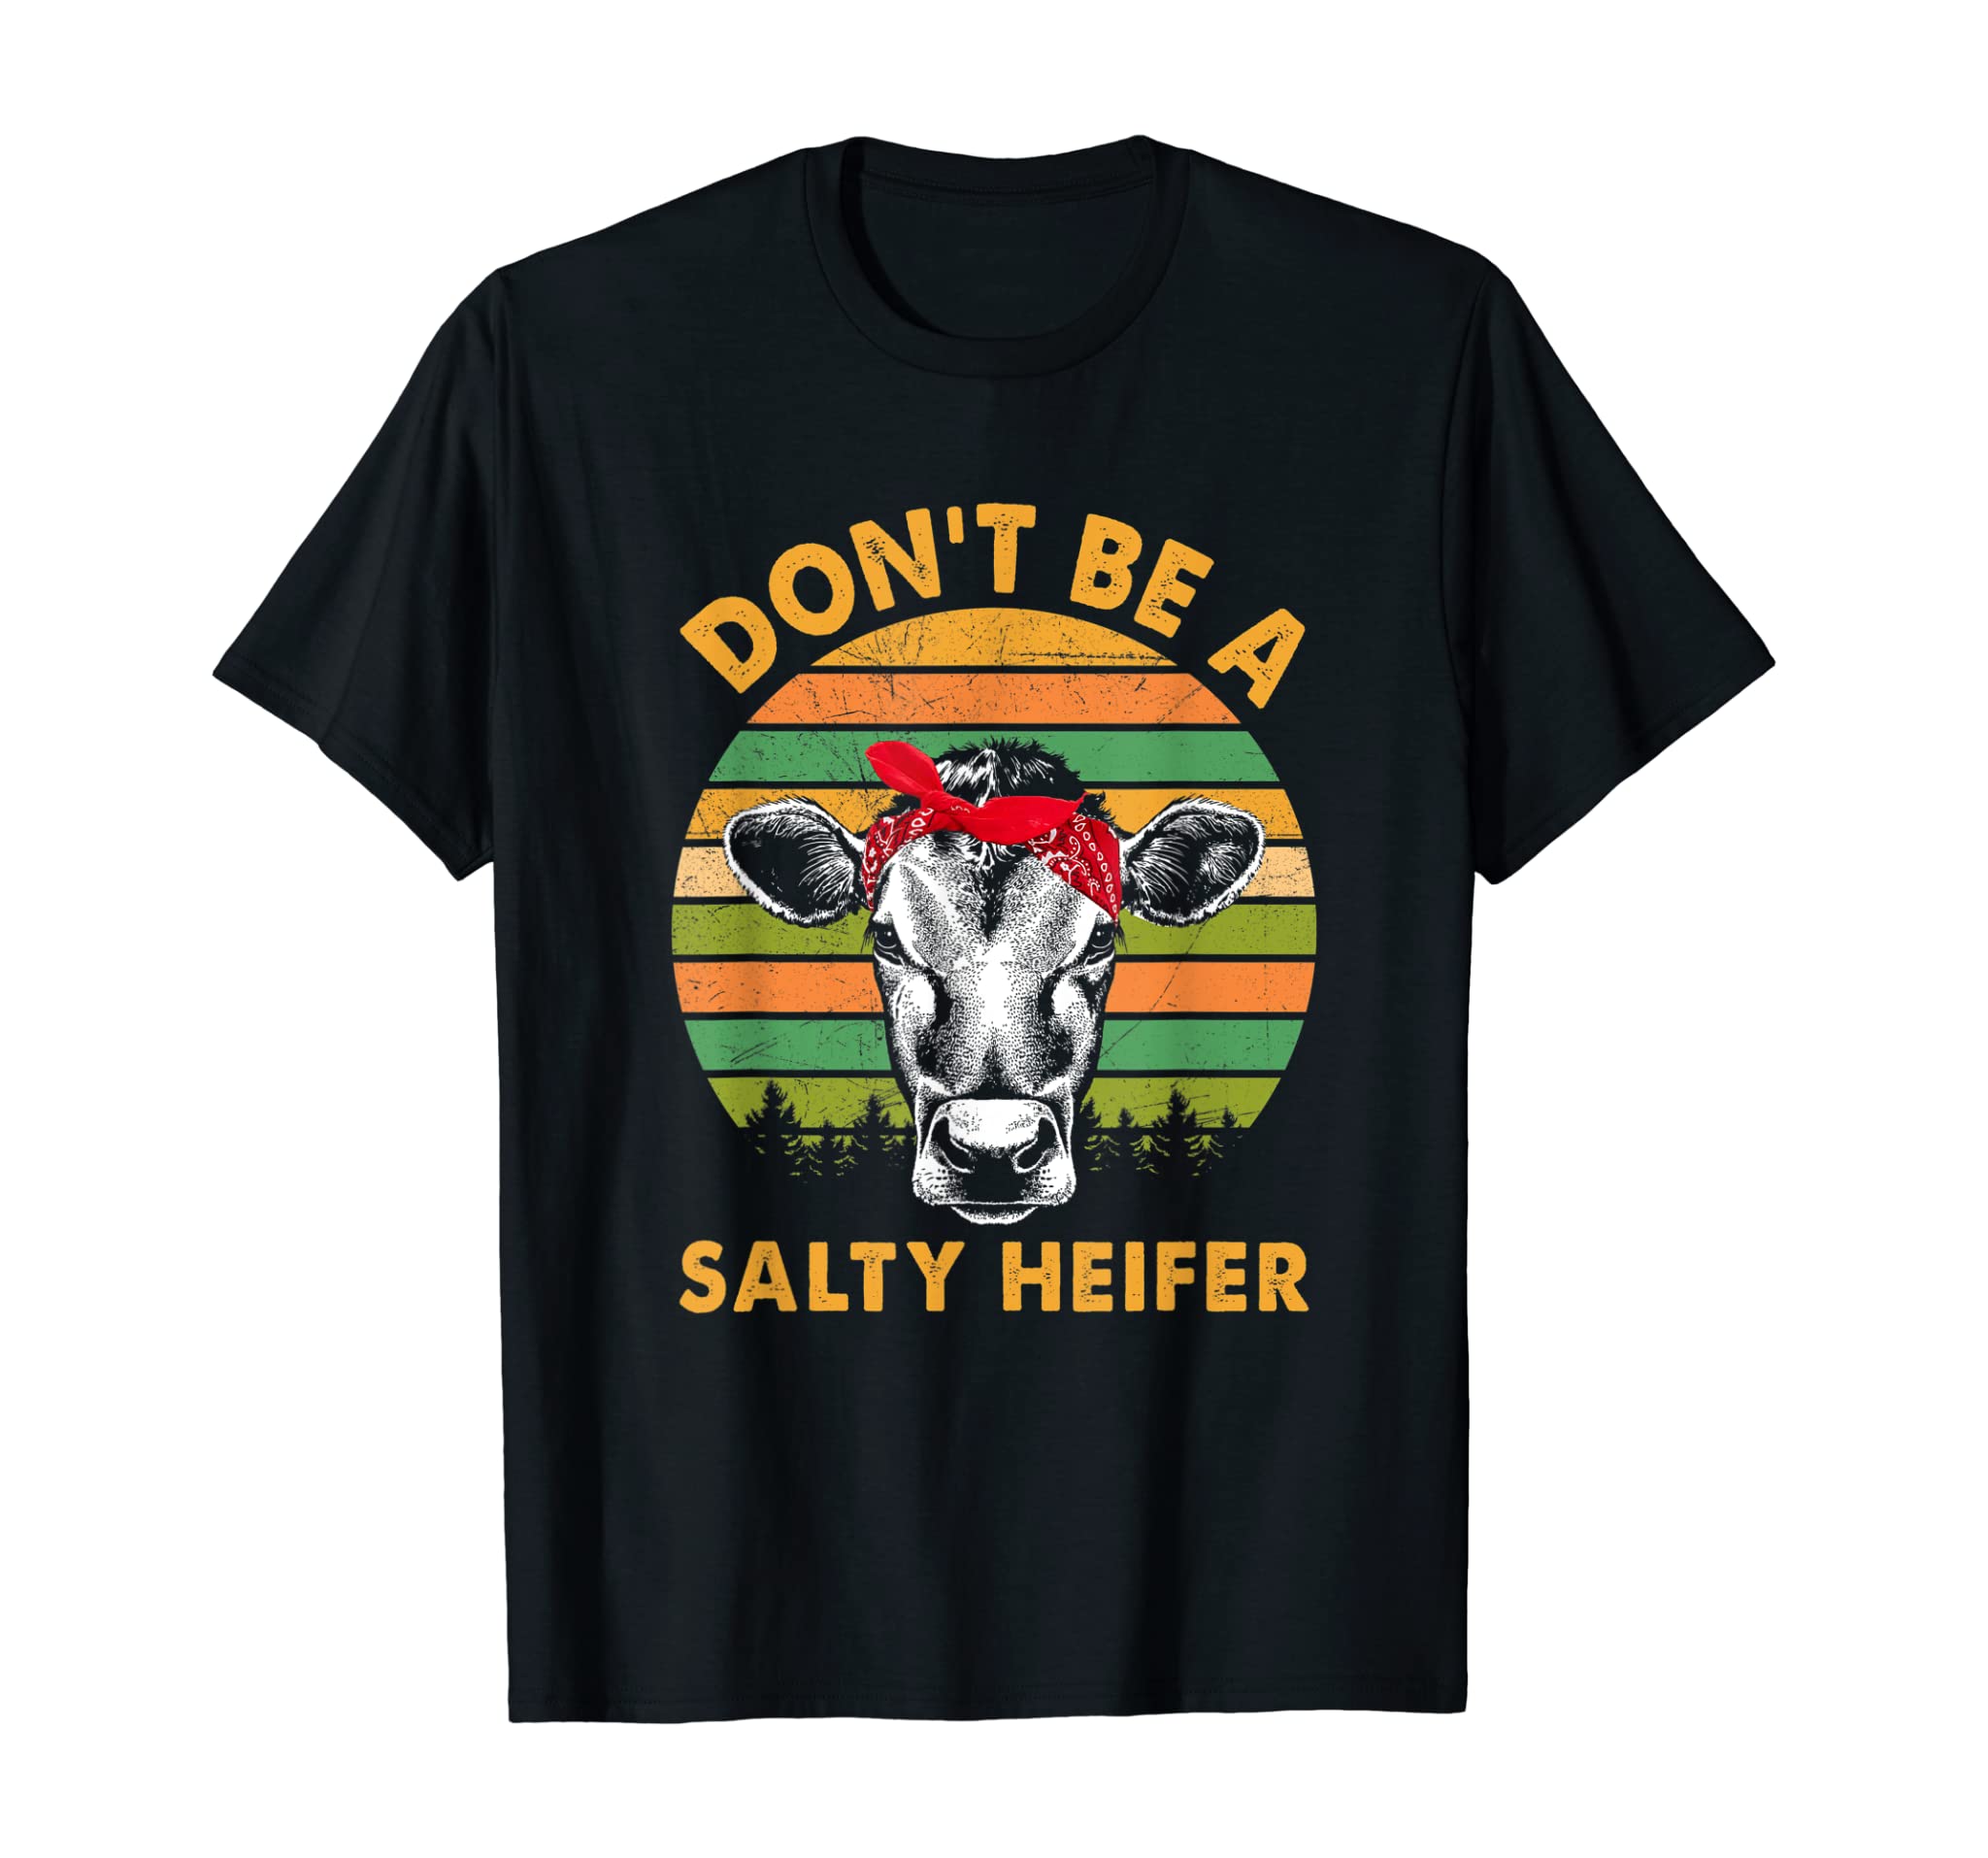 Don’t Be A Salty Heifer t shirt cows lover gift vintage farm